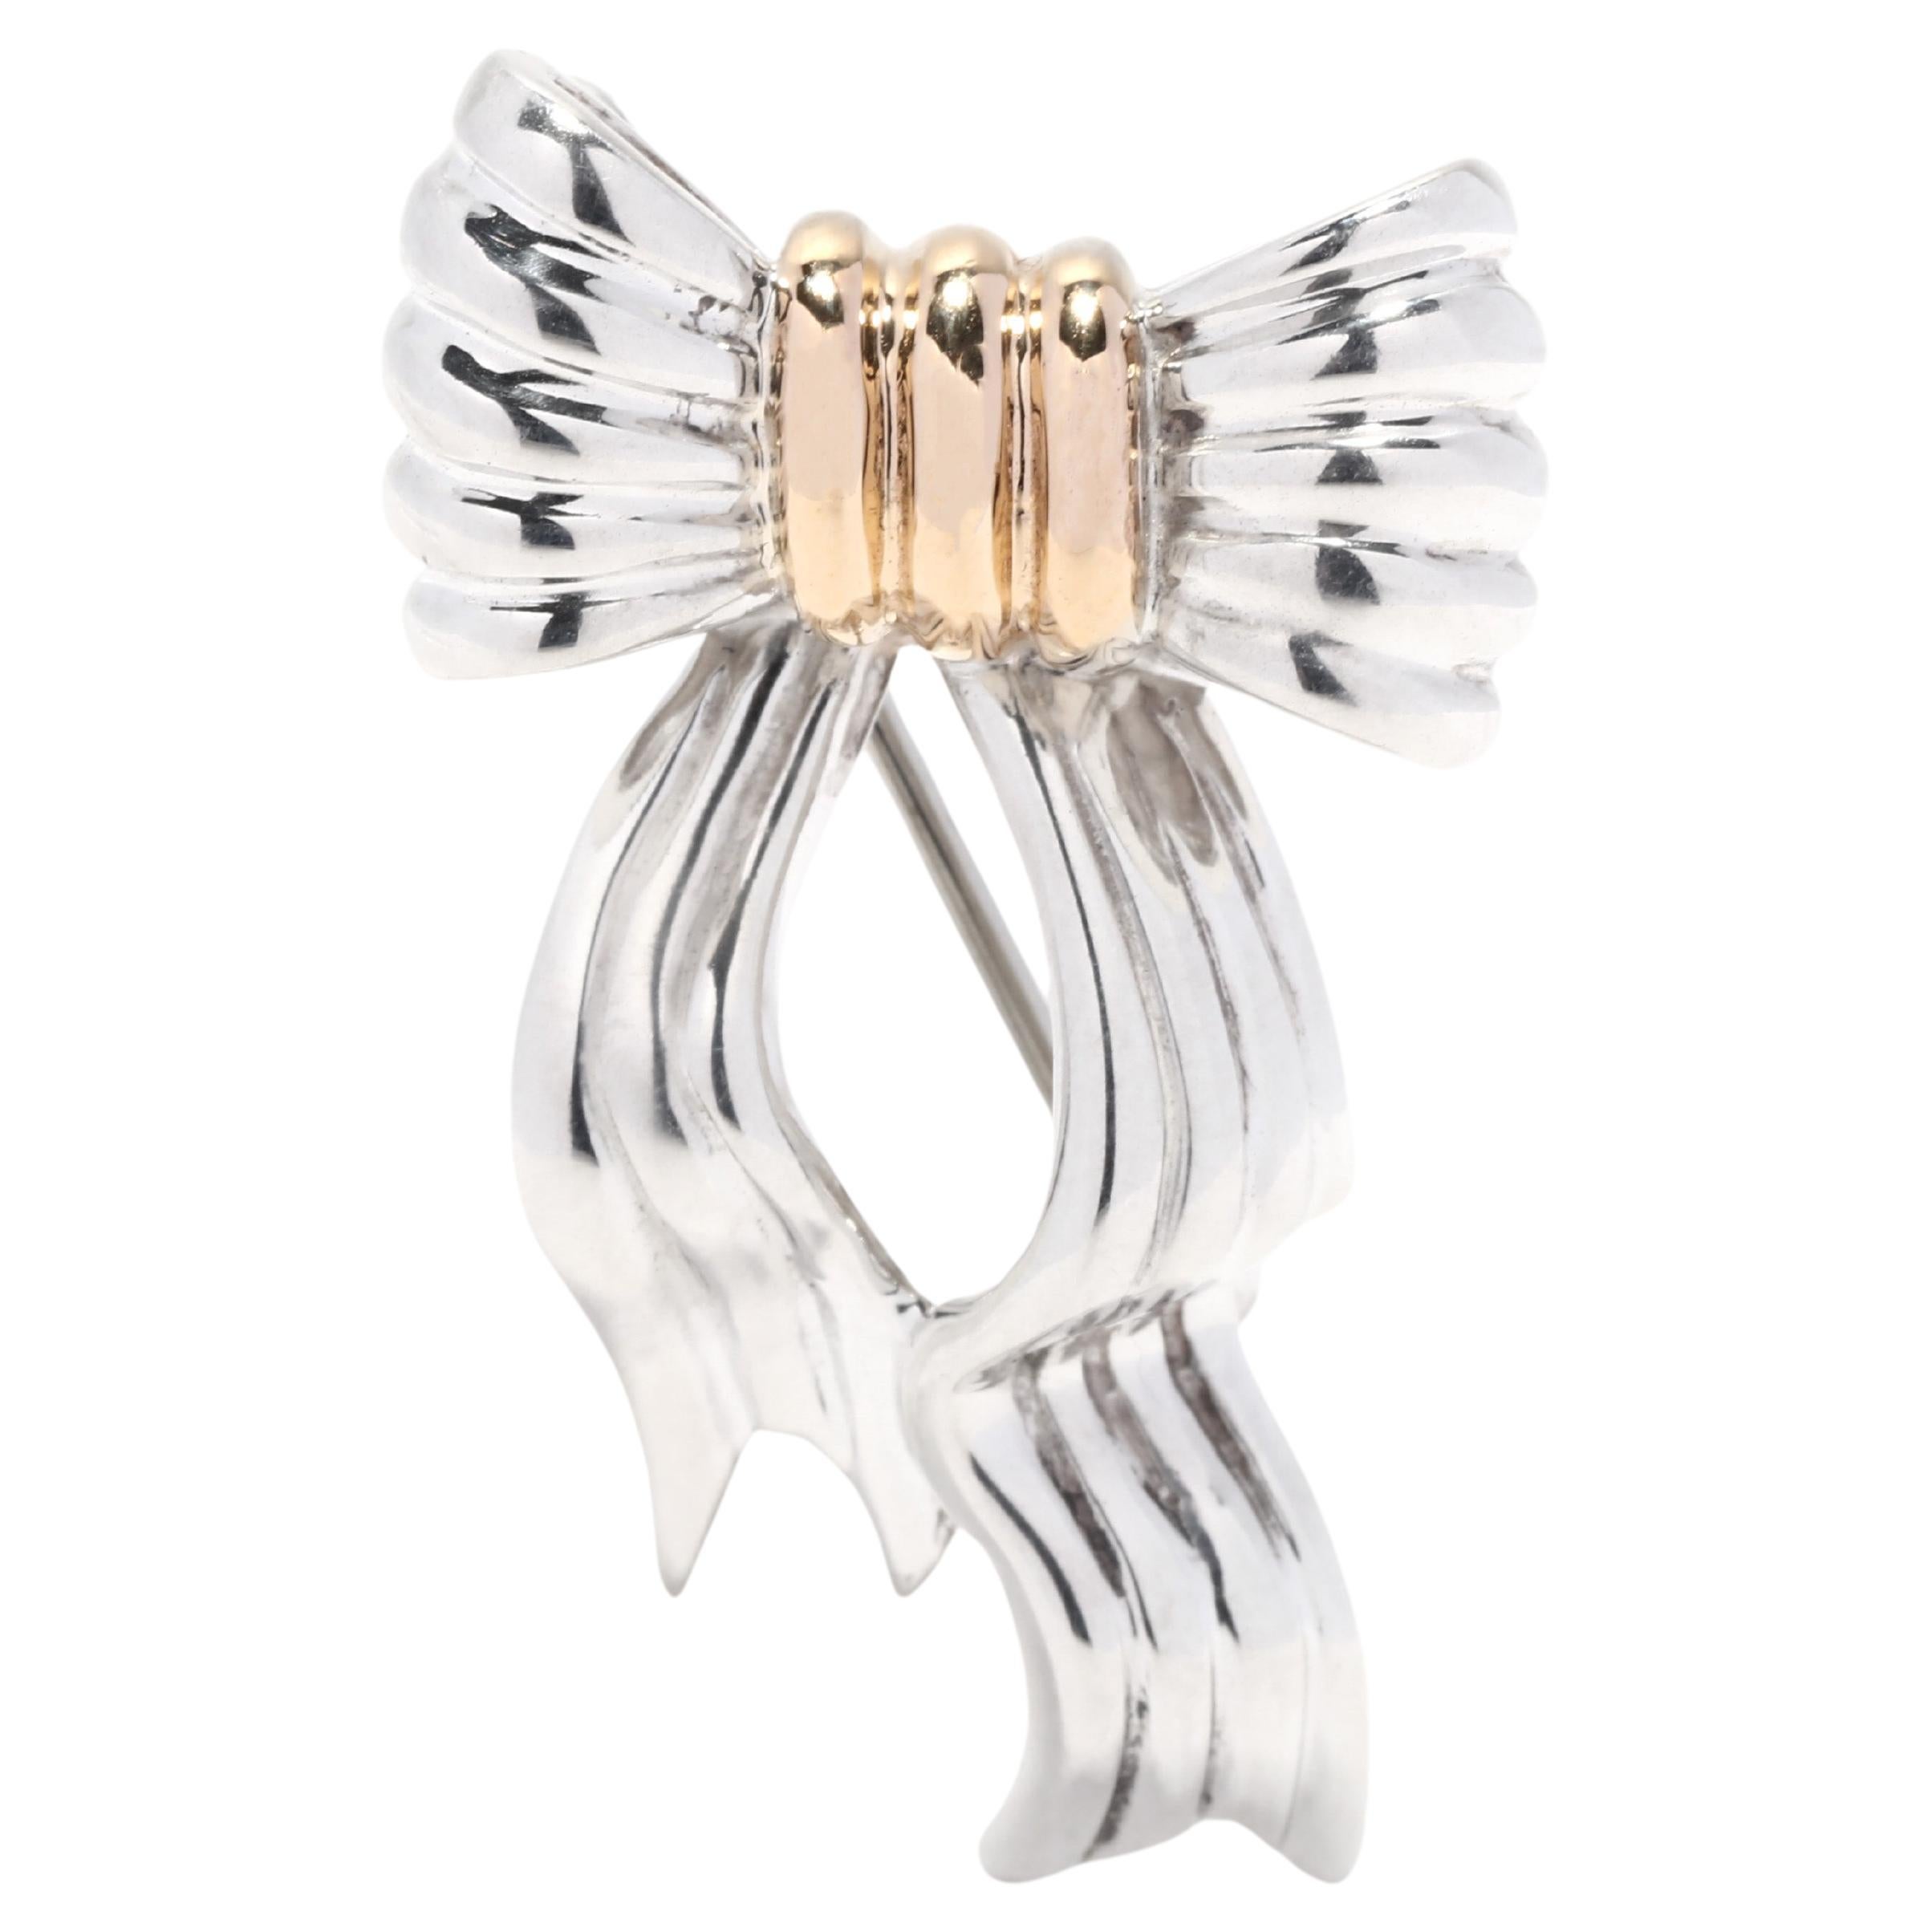 Tiffany and Company Small Bow Brooch, 18K Yellow Gold Sterling Silver